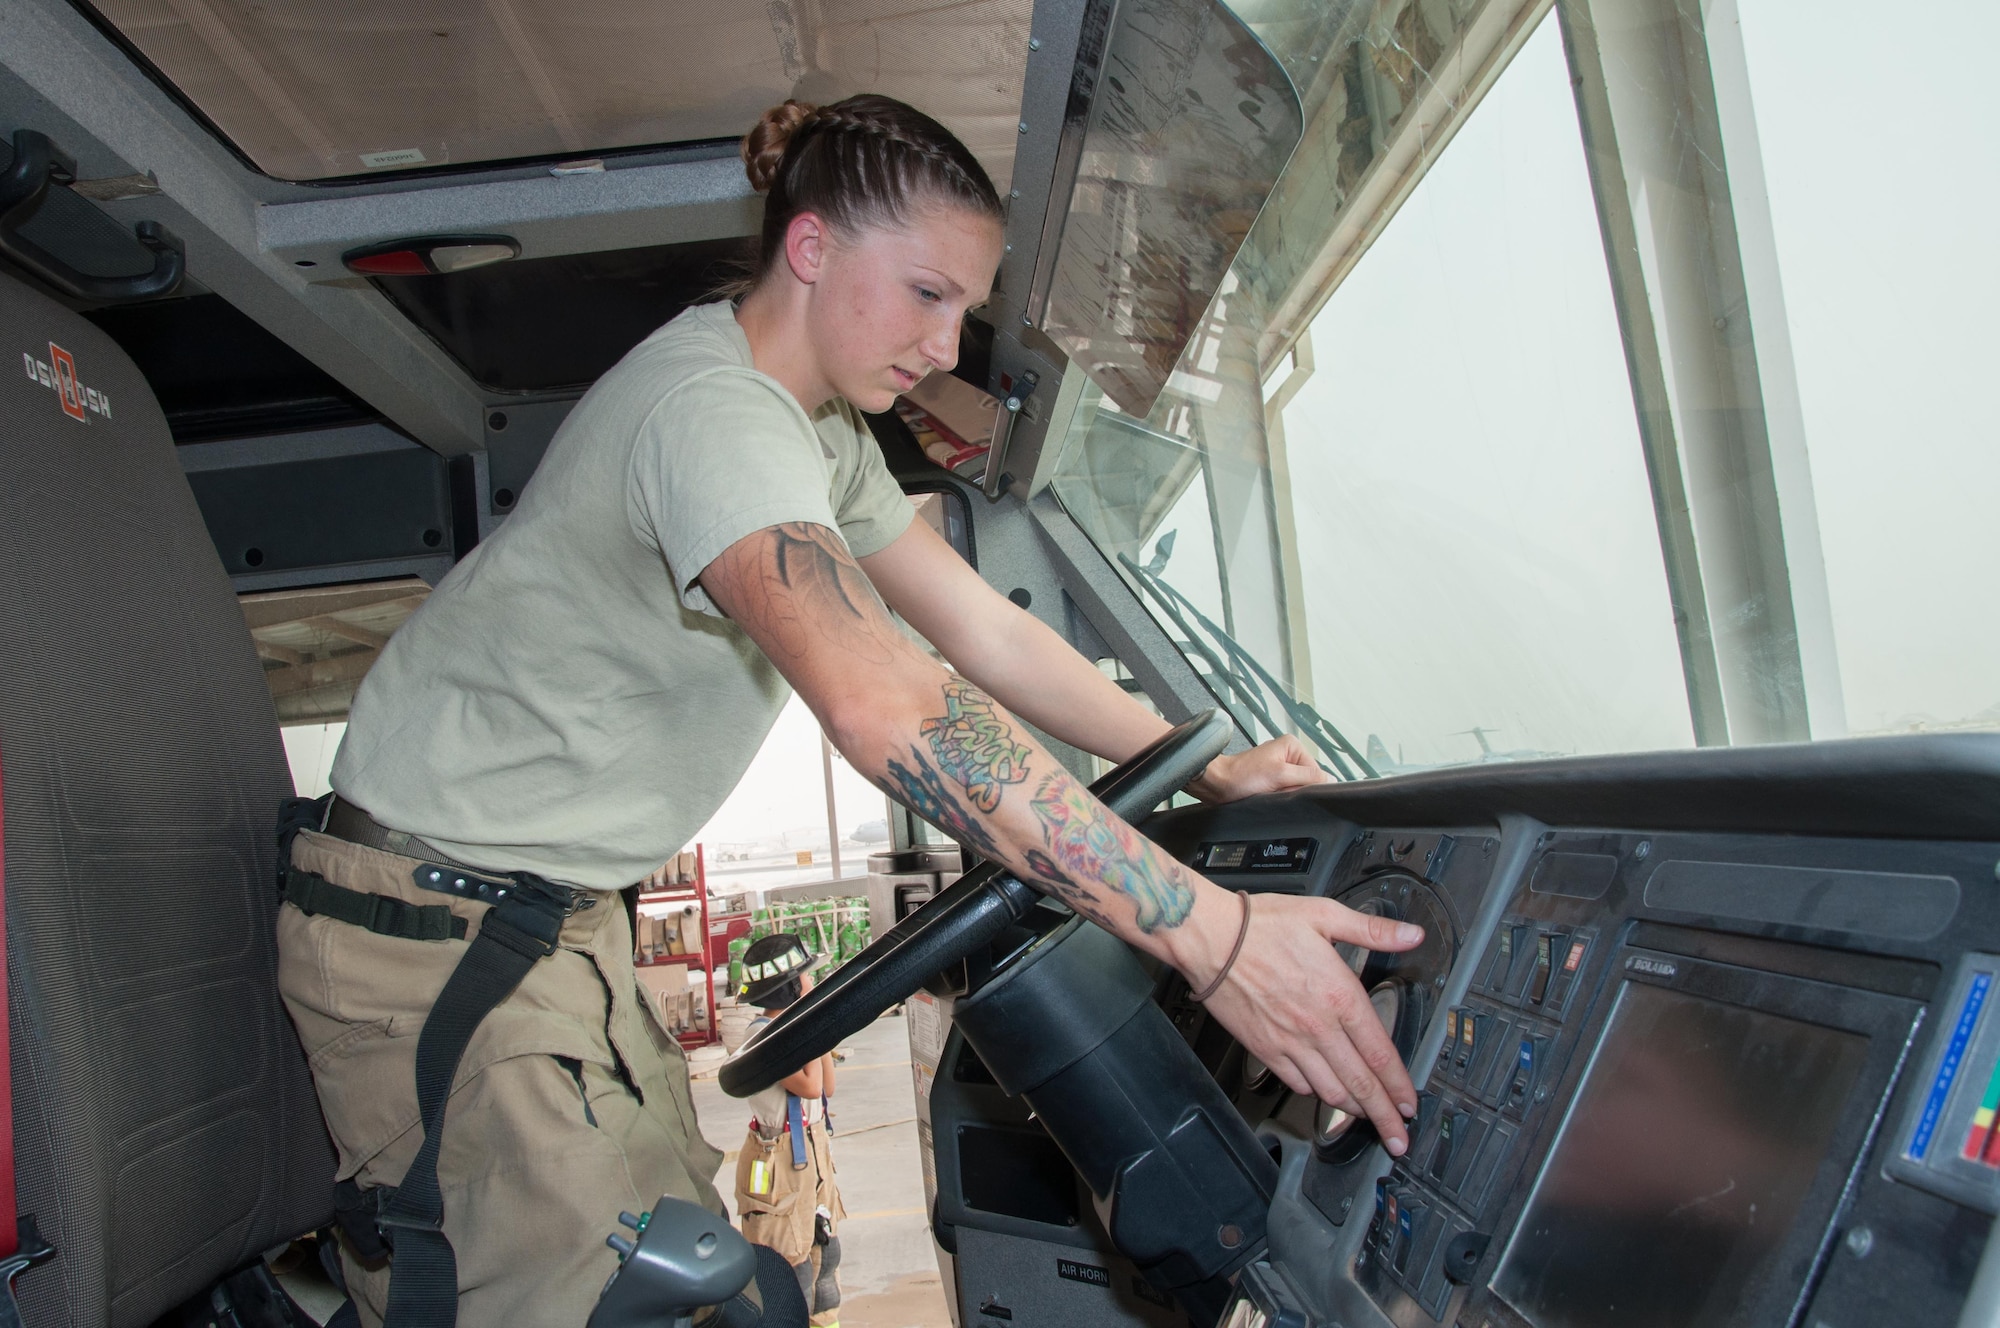 Senior Airman Ashley Eisenbarth, a firefighter assigned to the 386th Civil Engineer Squadron, increases the pump throttle on a fire truck at an undisclosed location in Southwest Asia, June 25, 2017. (U.S. Air Force photo by Master Sgt. Eric M. Sharman)